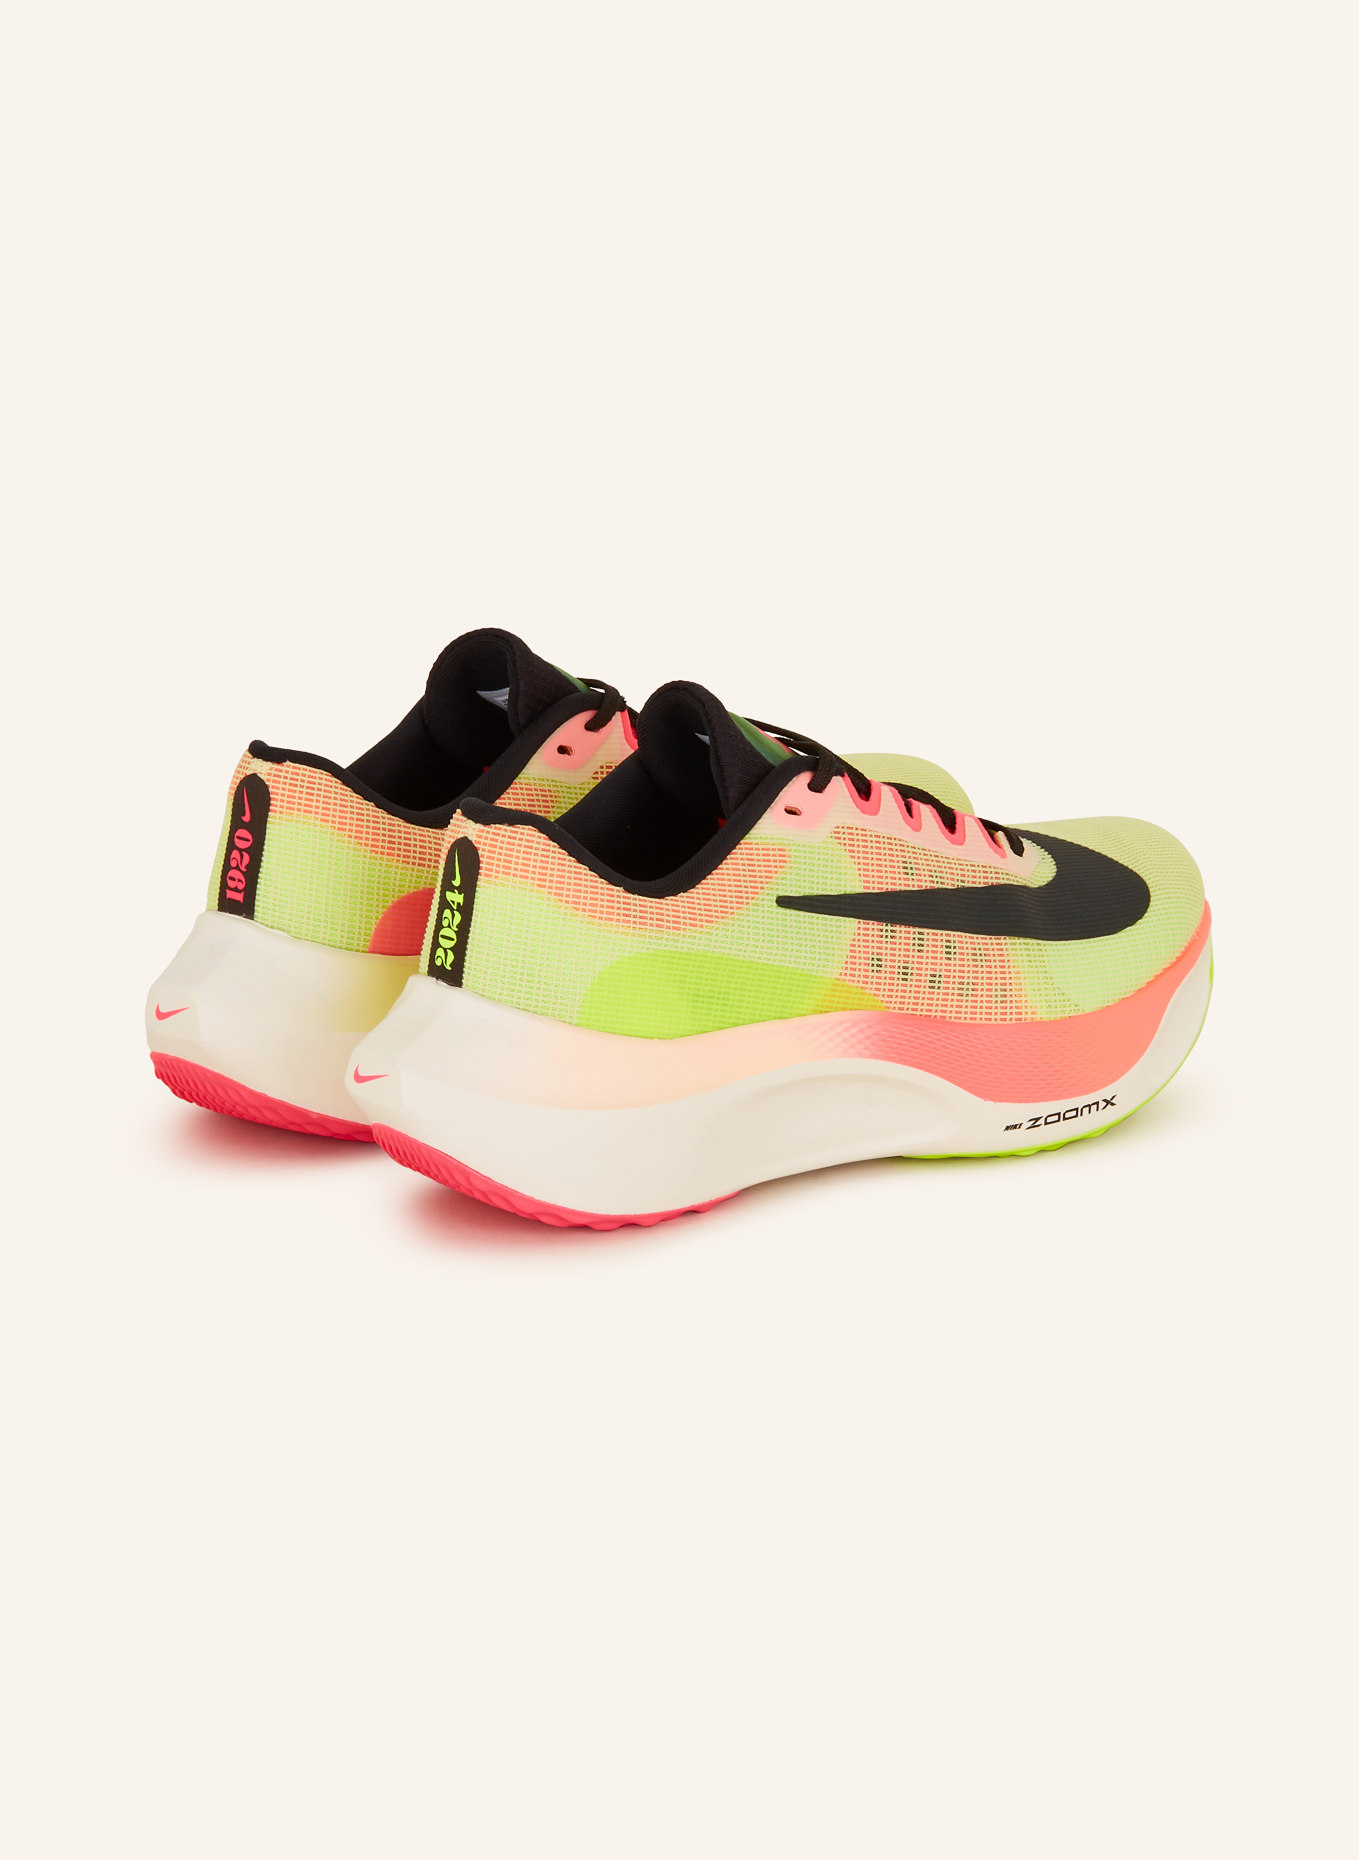 Nike Running shoes ZOOM FLY 5 PREMIUM, Color: NEON YELLOW/ NEON PINK/ BLACK (Image 2)